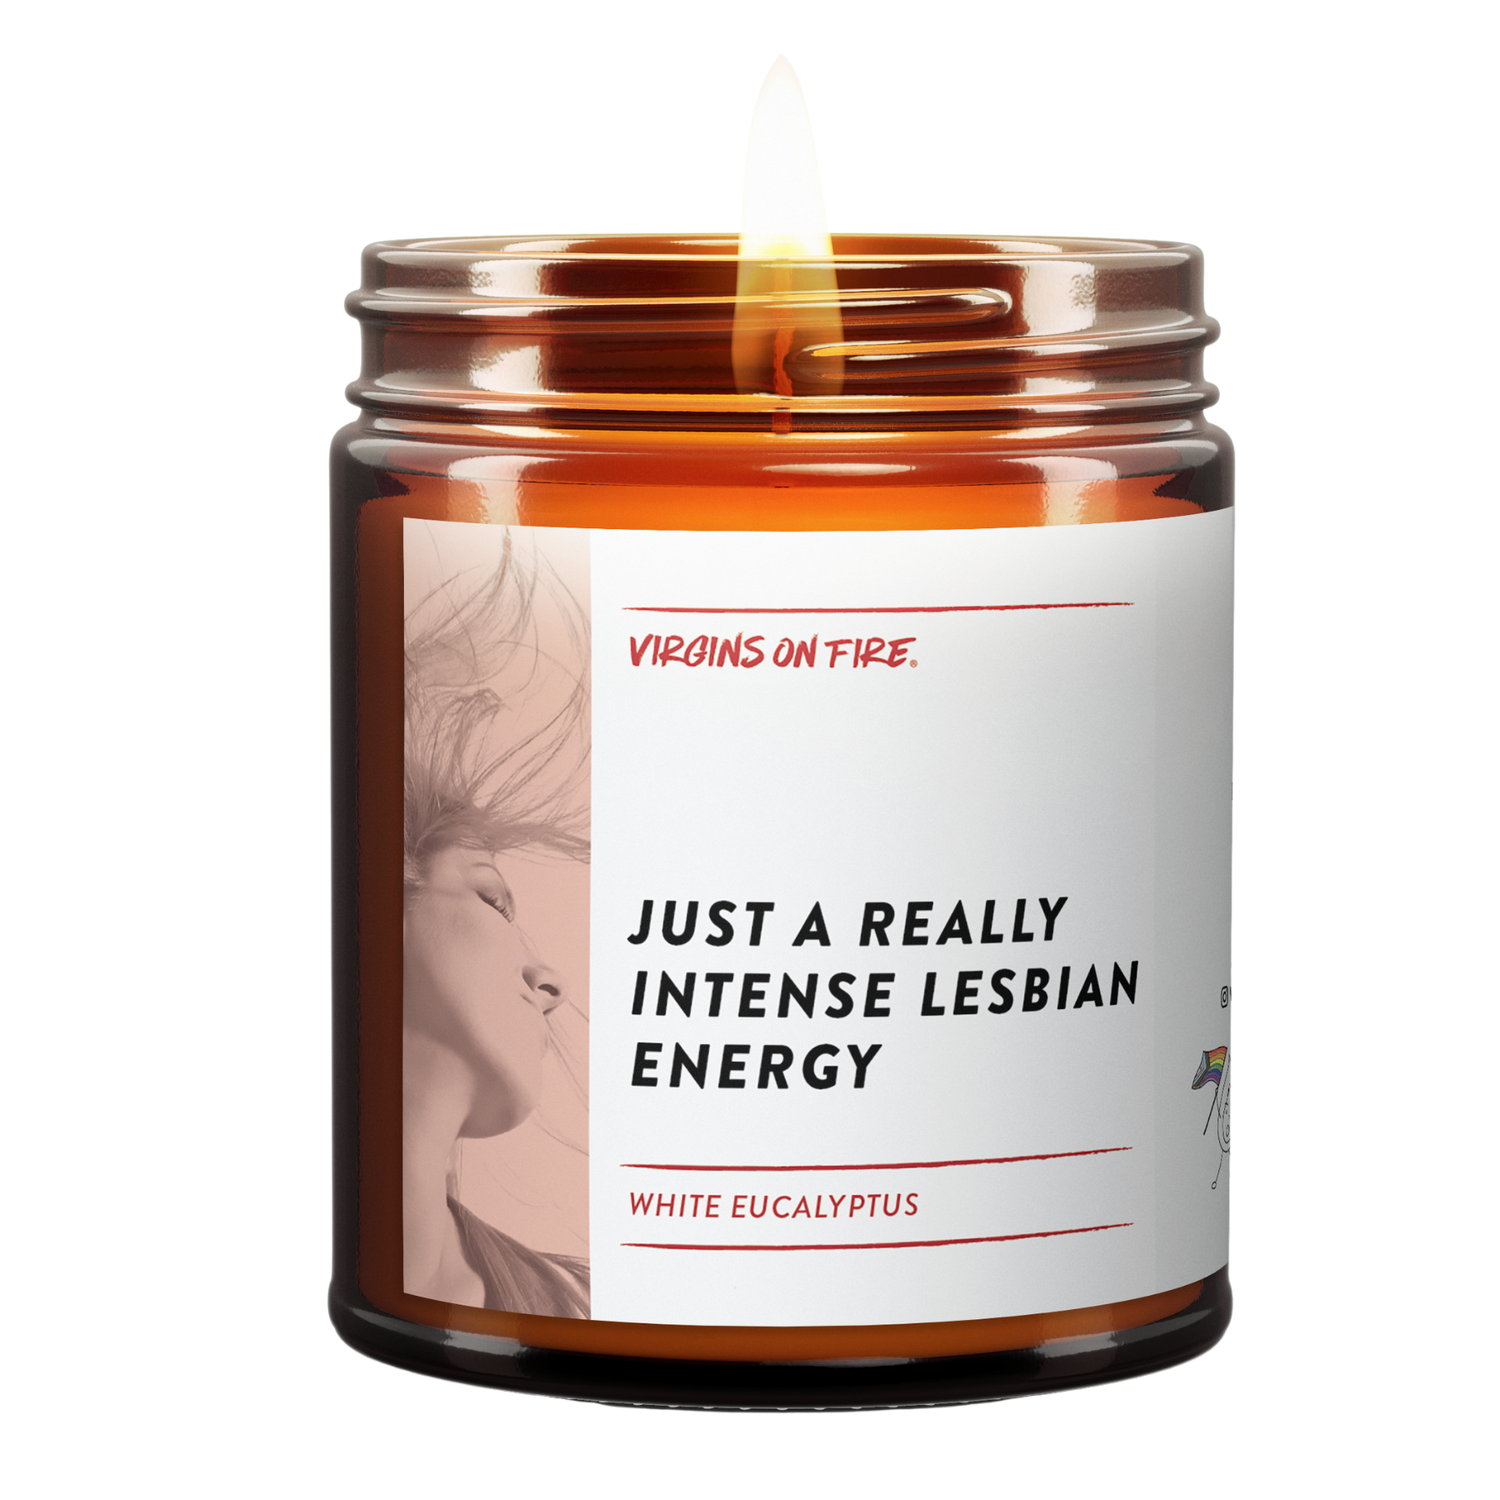 JUST A REALLY INTENSE LESBIAN ENERGY (Eucalyptus) Soy Candle